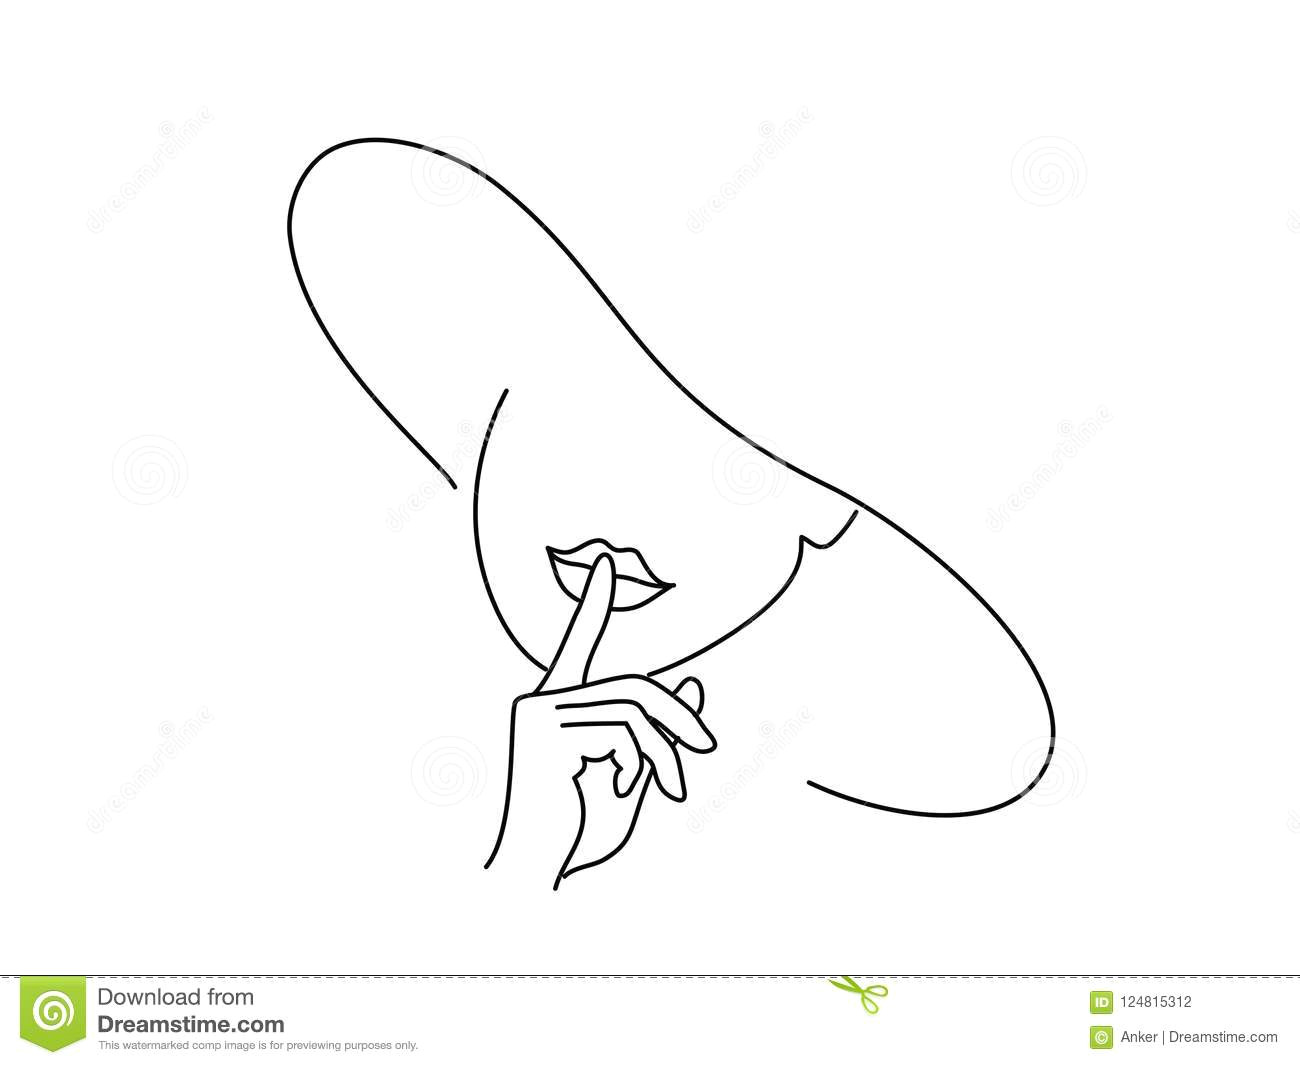 Drawings Of Women S Hands Line Drawing Art Woman Face with Hand Stock Vector Illustration